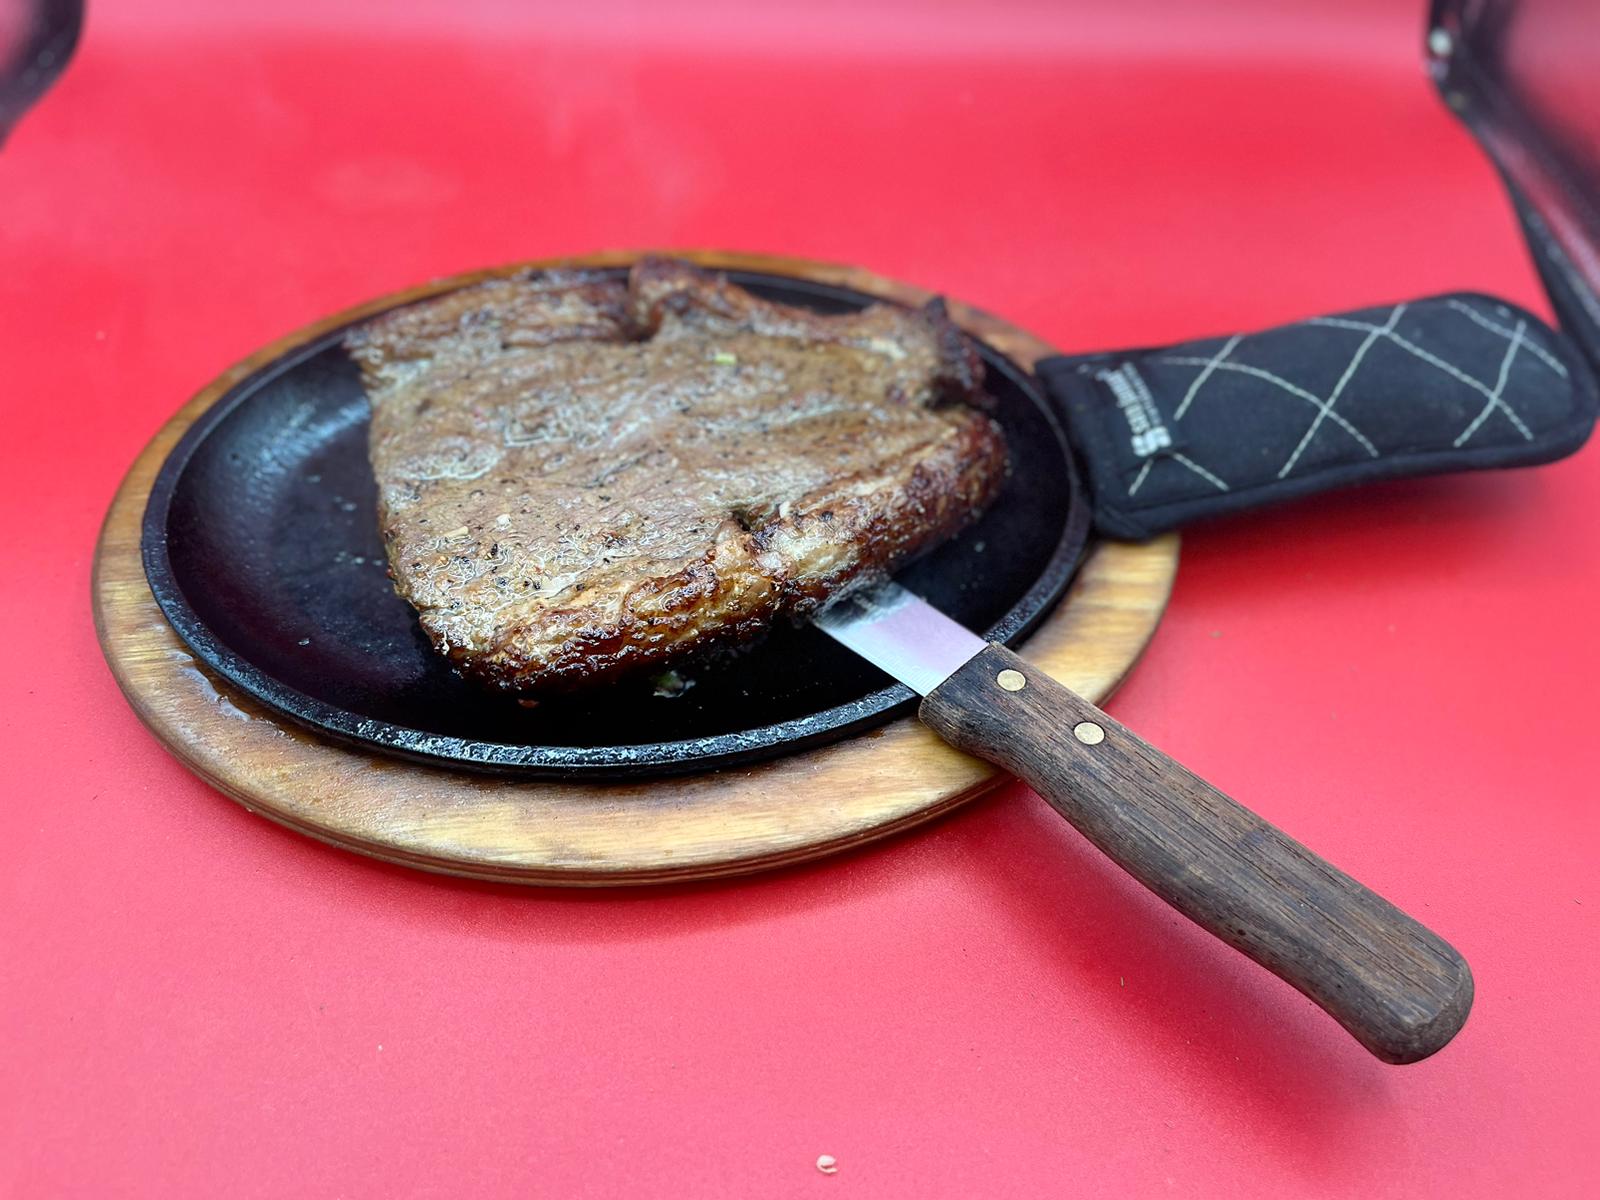 A steak in a pan with a knife on top.